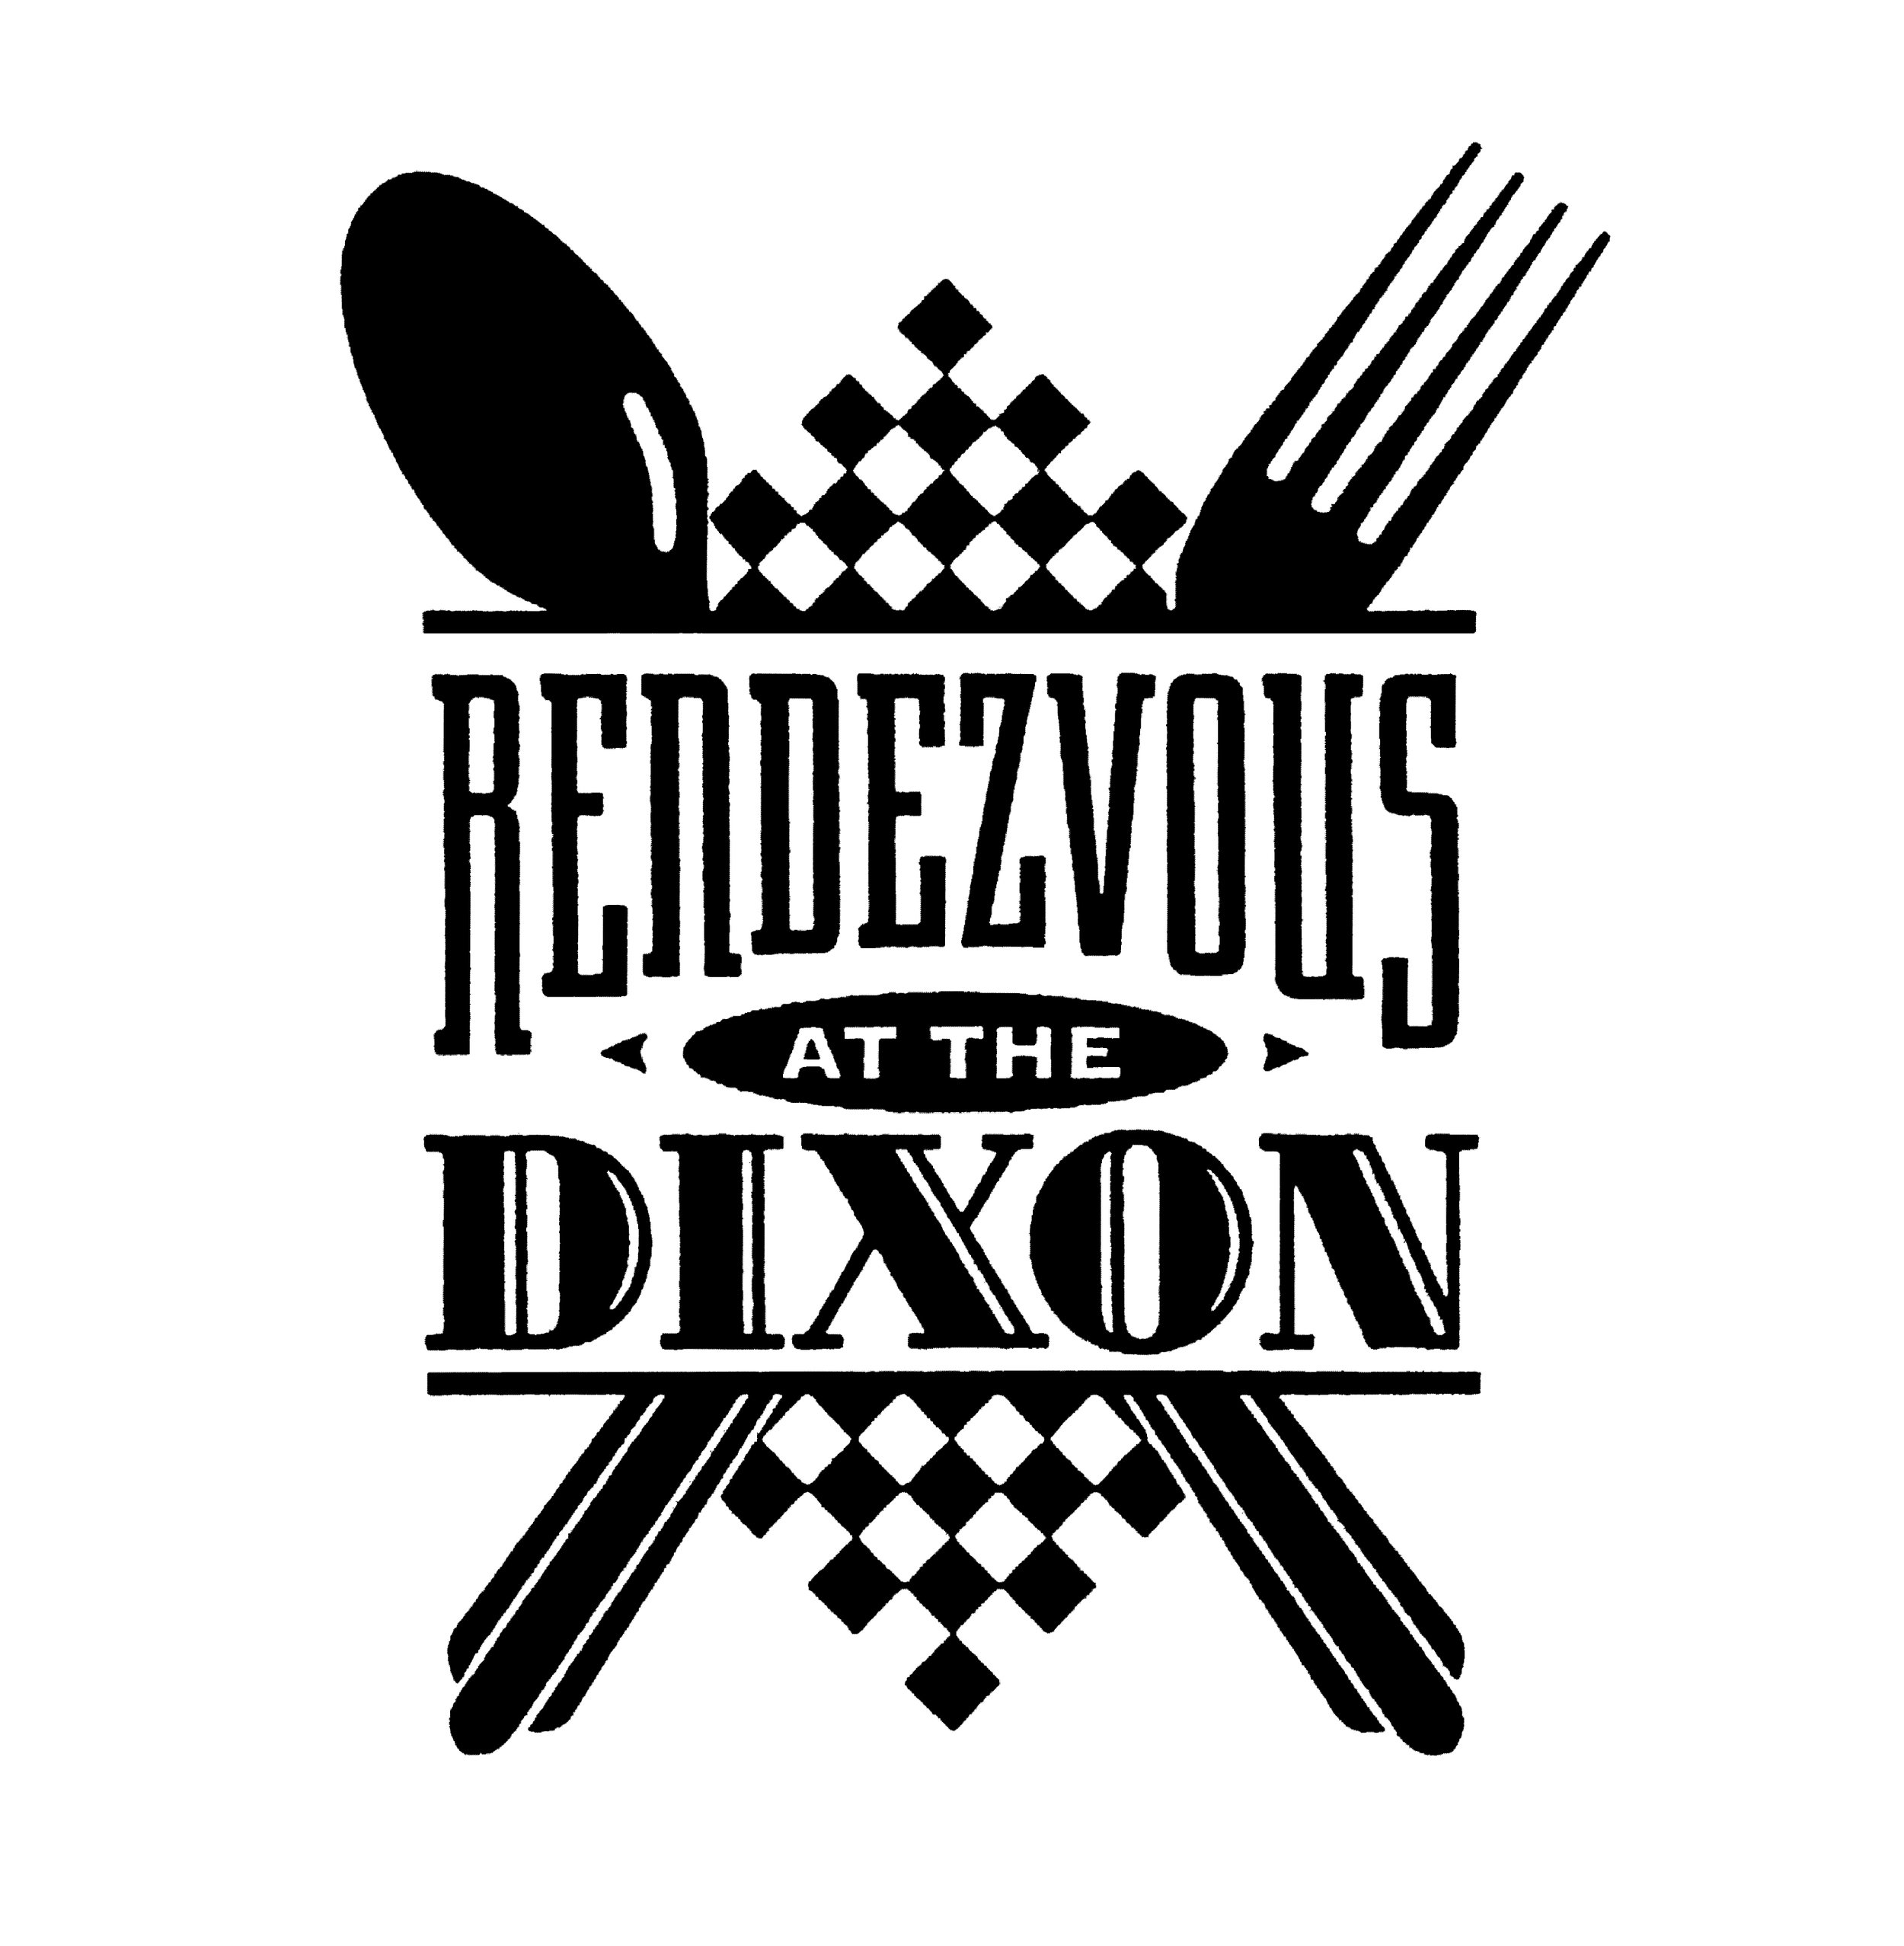  Dixon Gallery &amp; Gardens “Rendezvous at the Dixon” member picnic logo  Special thanks to David Brugge for some way early Adobe Illustrator assist 